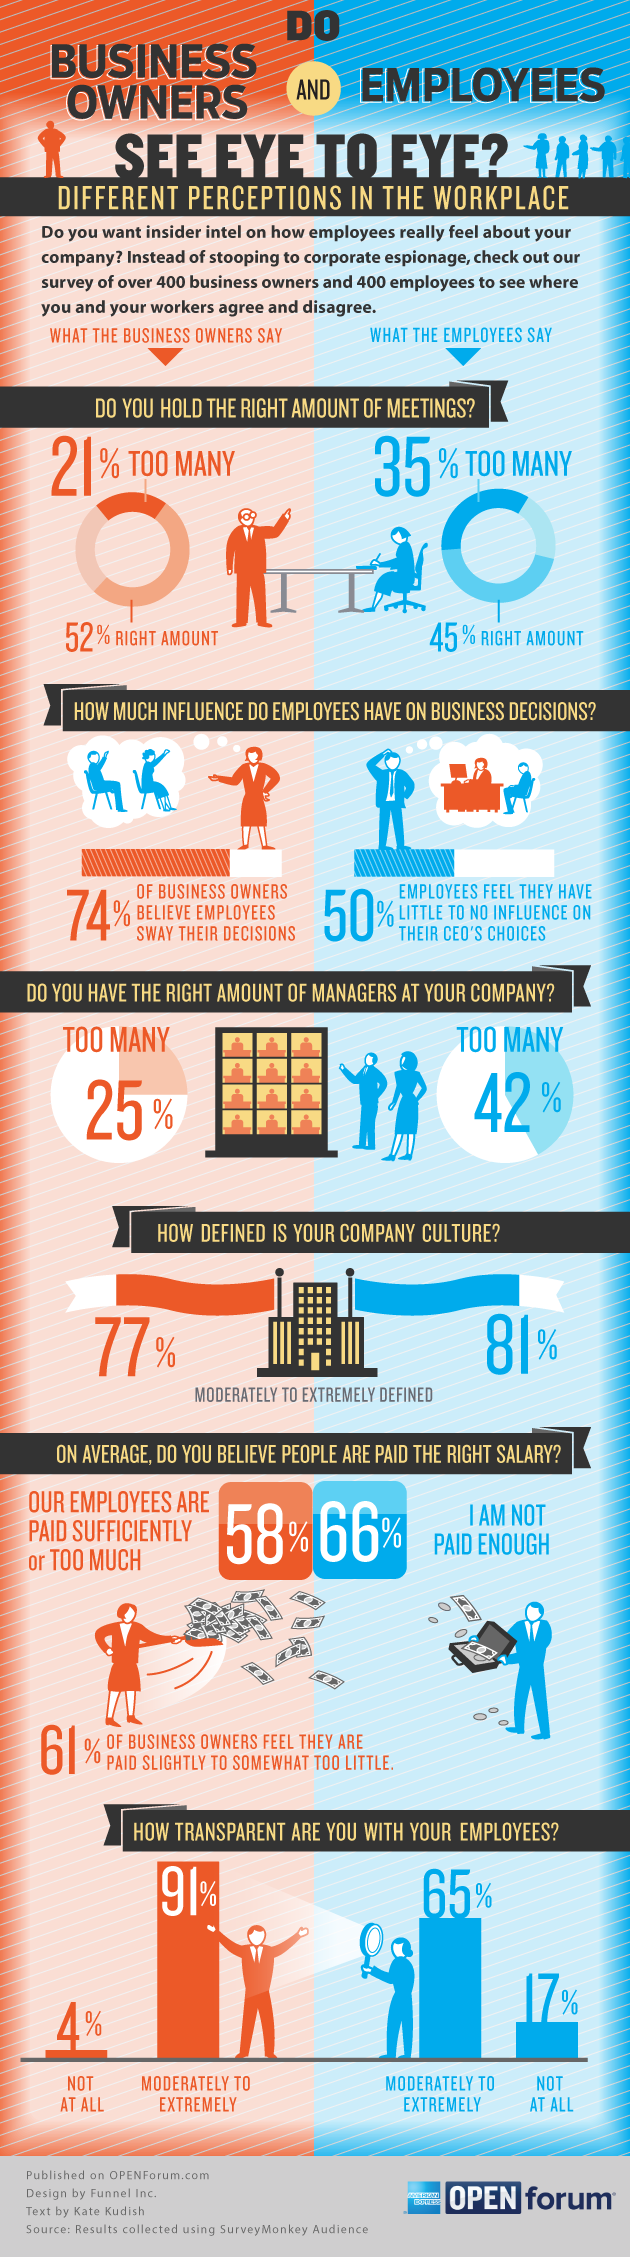 Do Business Owners and Employees See Eye to Eye?